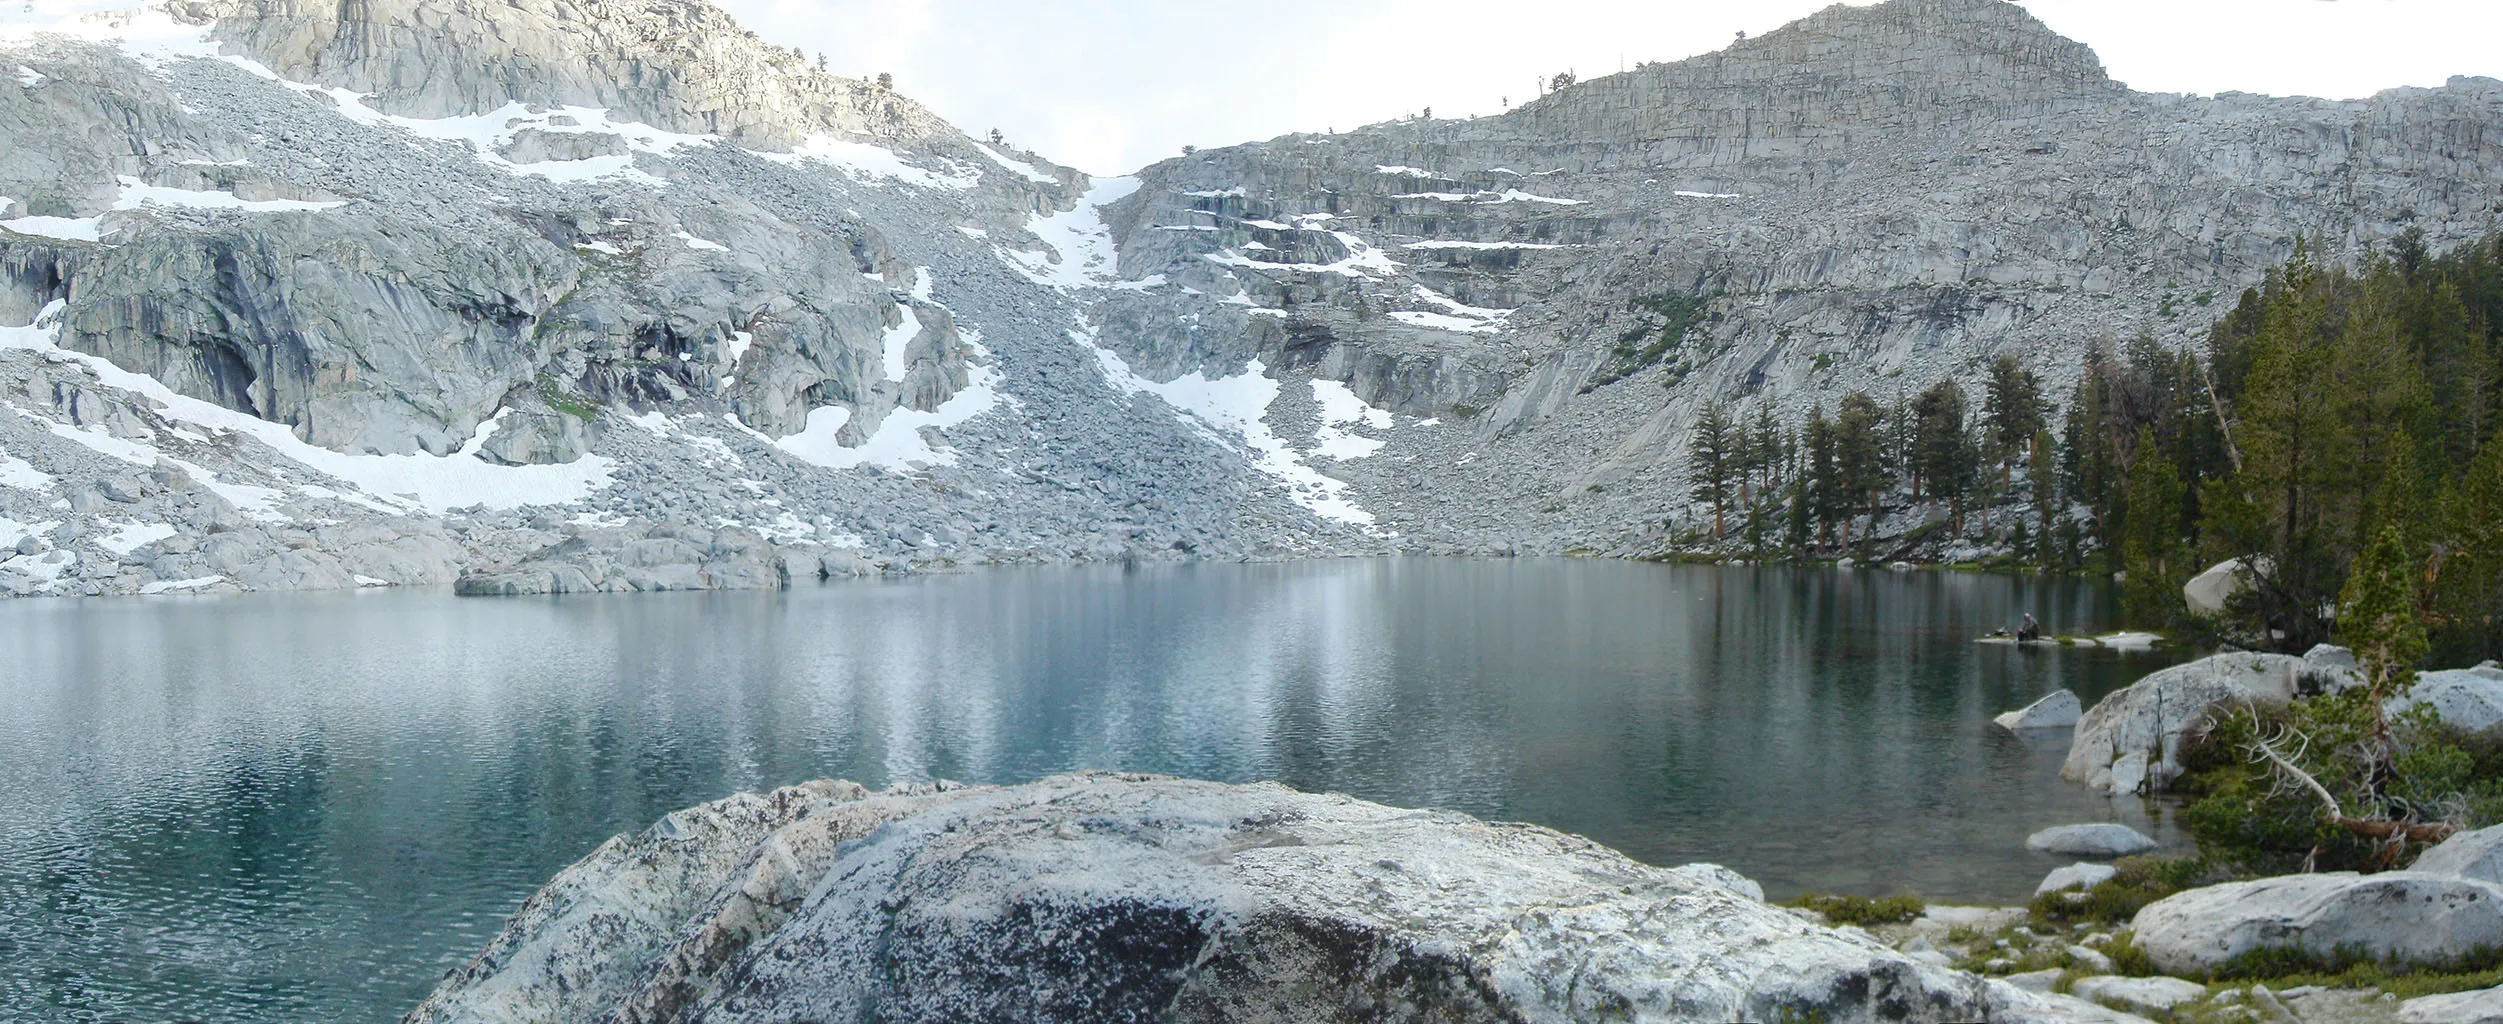 Another panorama of Eagle Lake